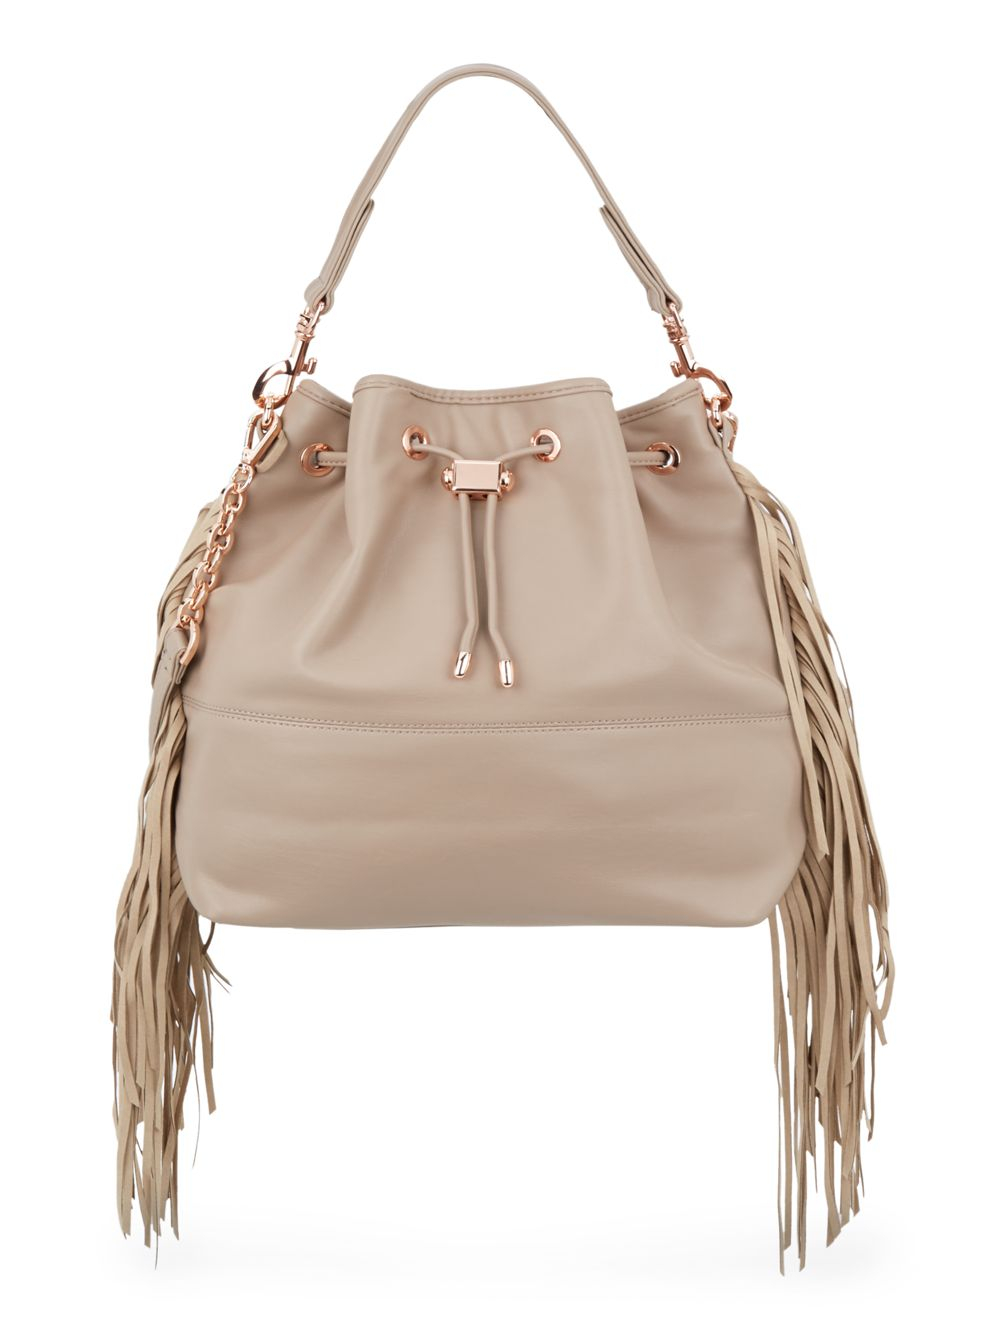 Deux Lux Handbags On Sale Up To 90% Off Retail